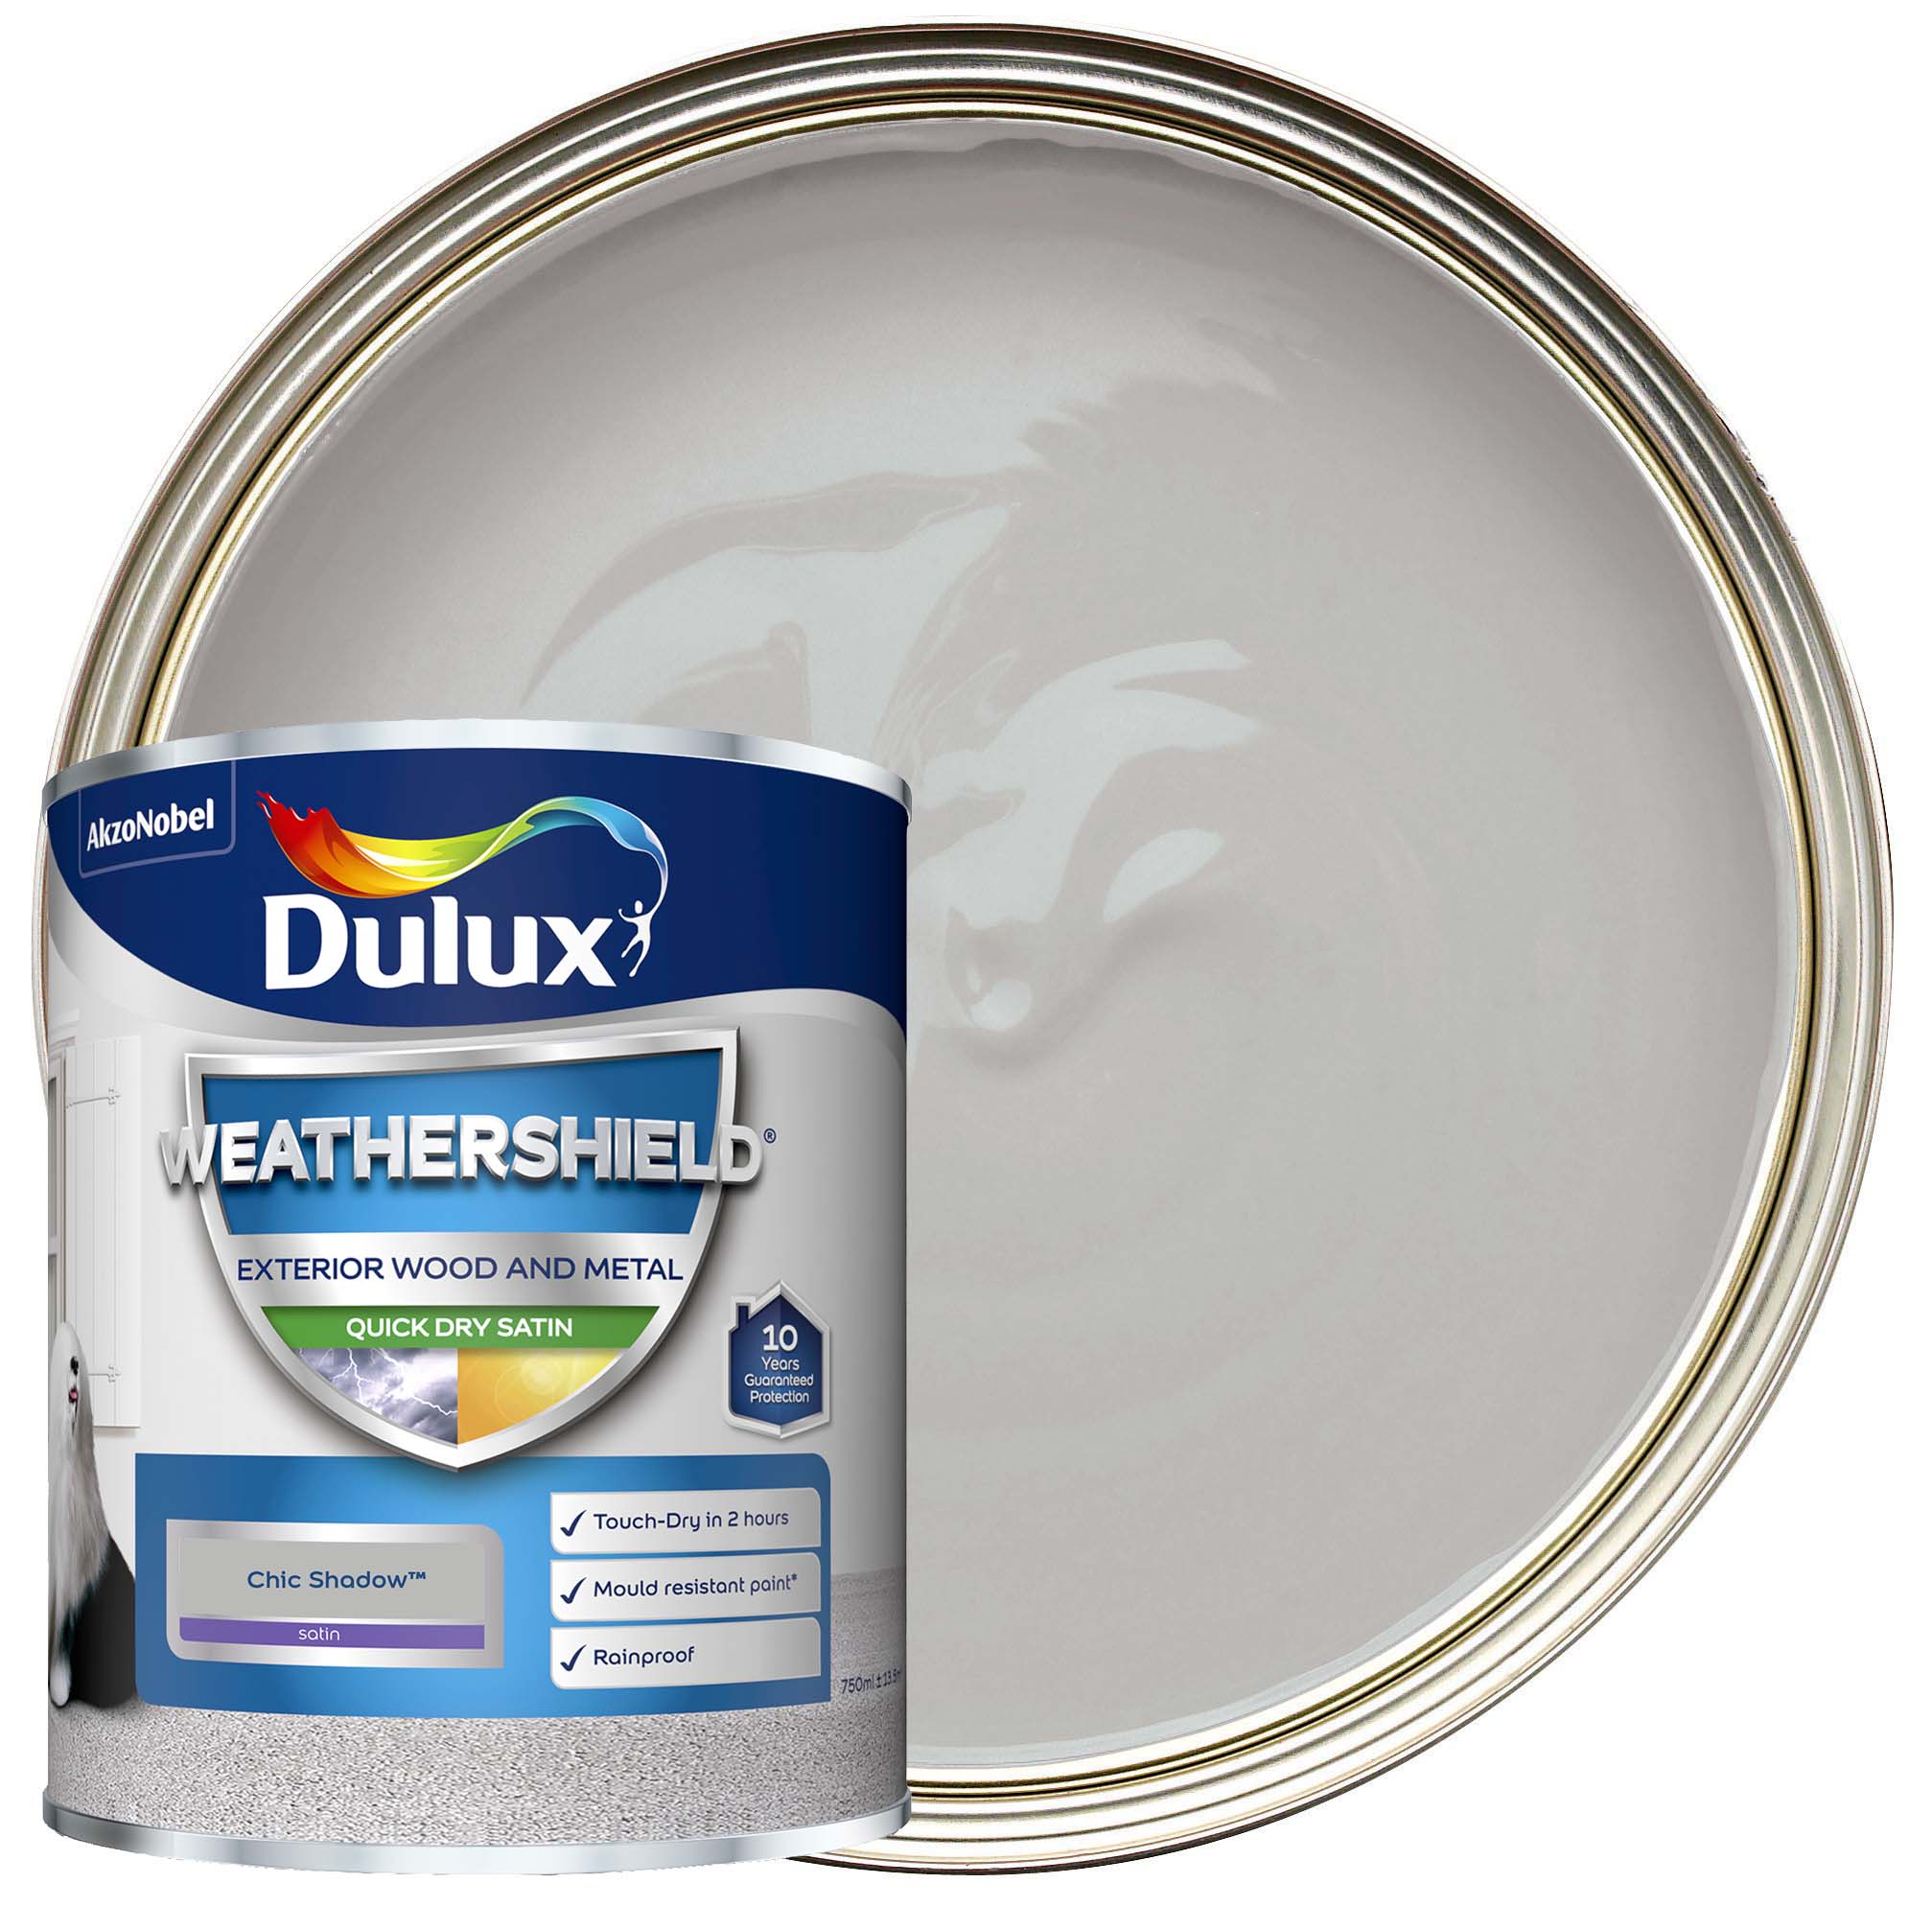 Dulux Weathershield Quick Dry Satin Paint - Chic Shadow - 750ml